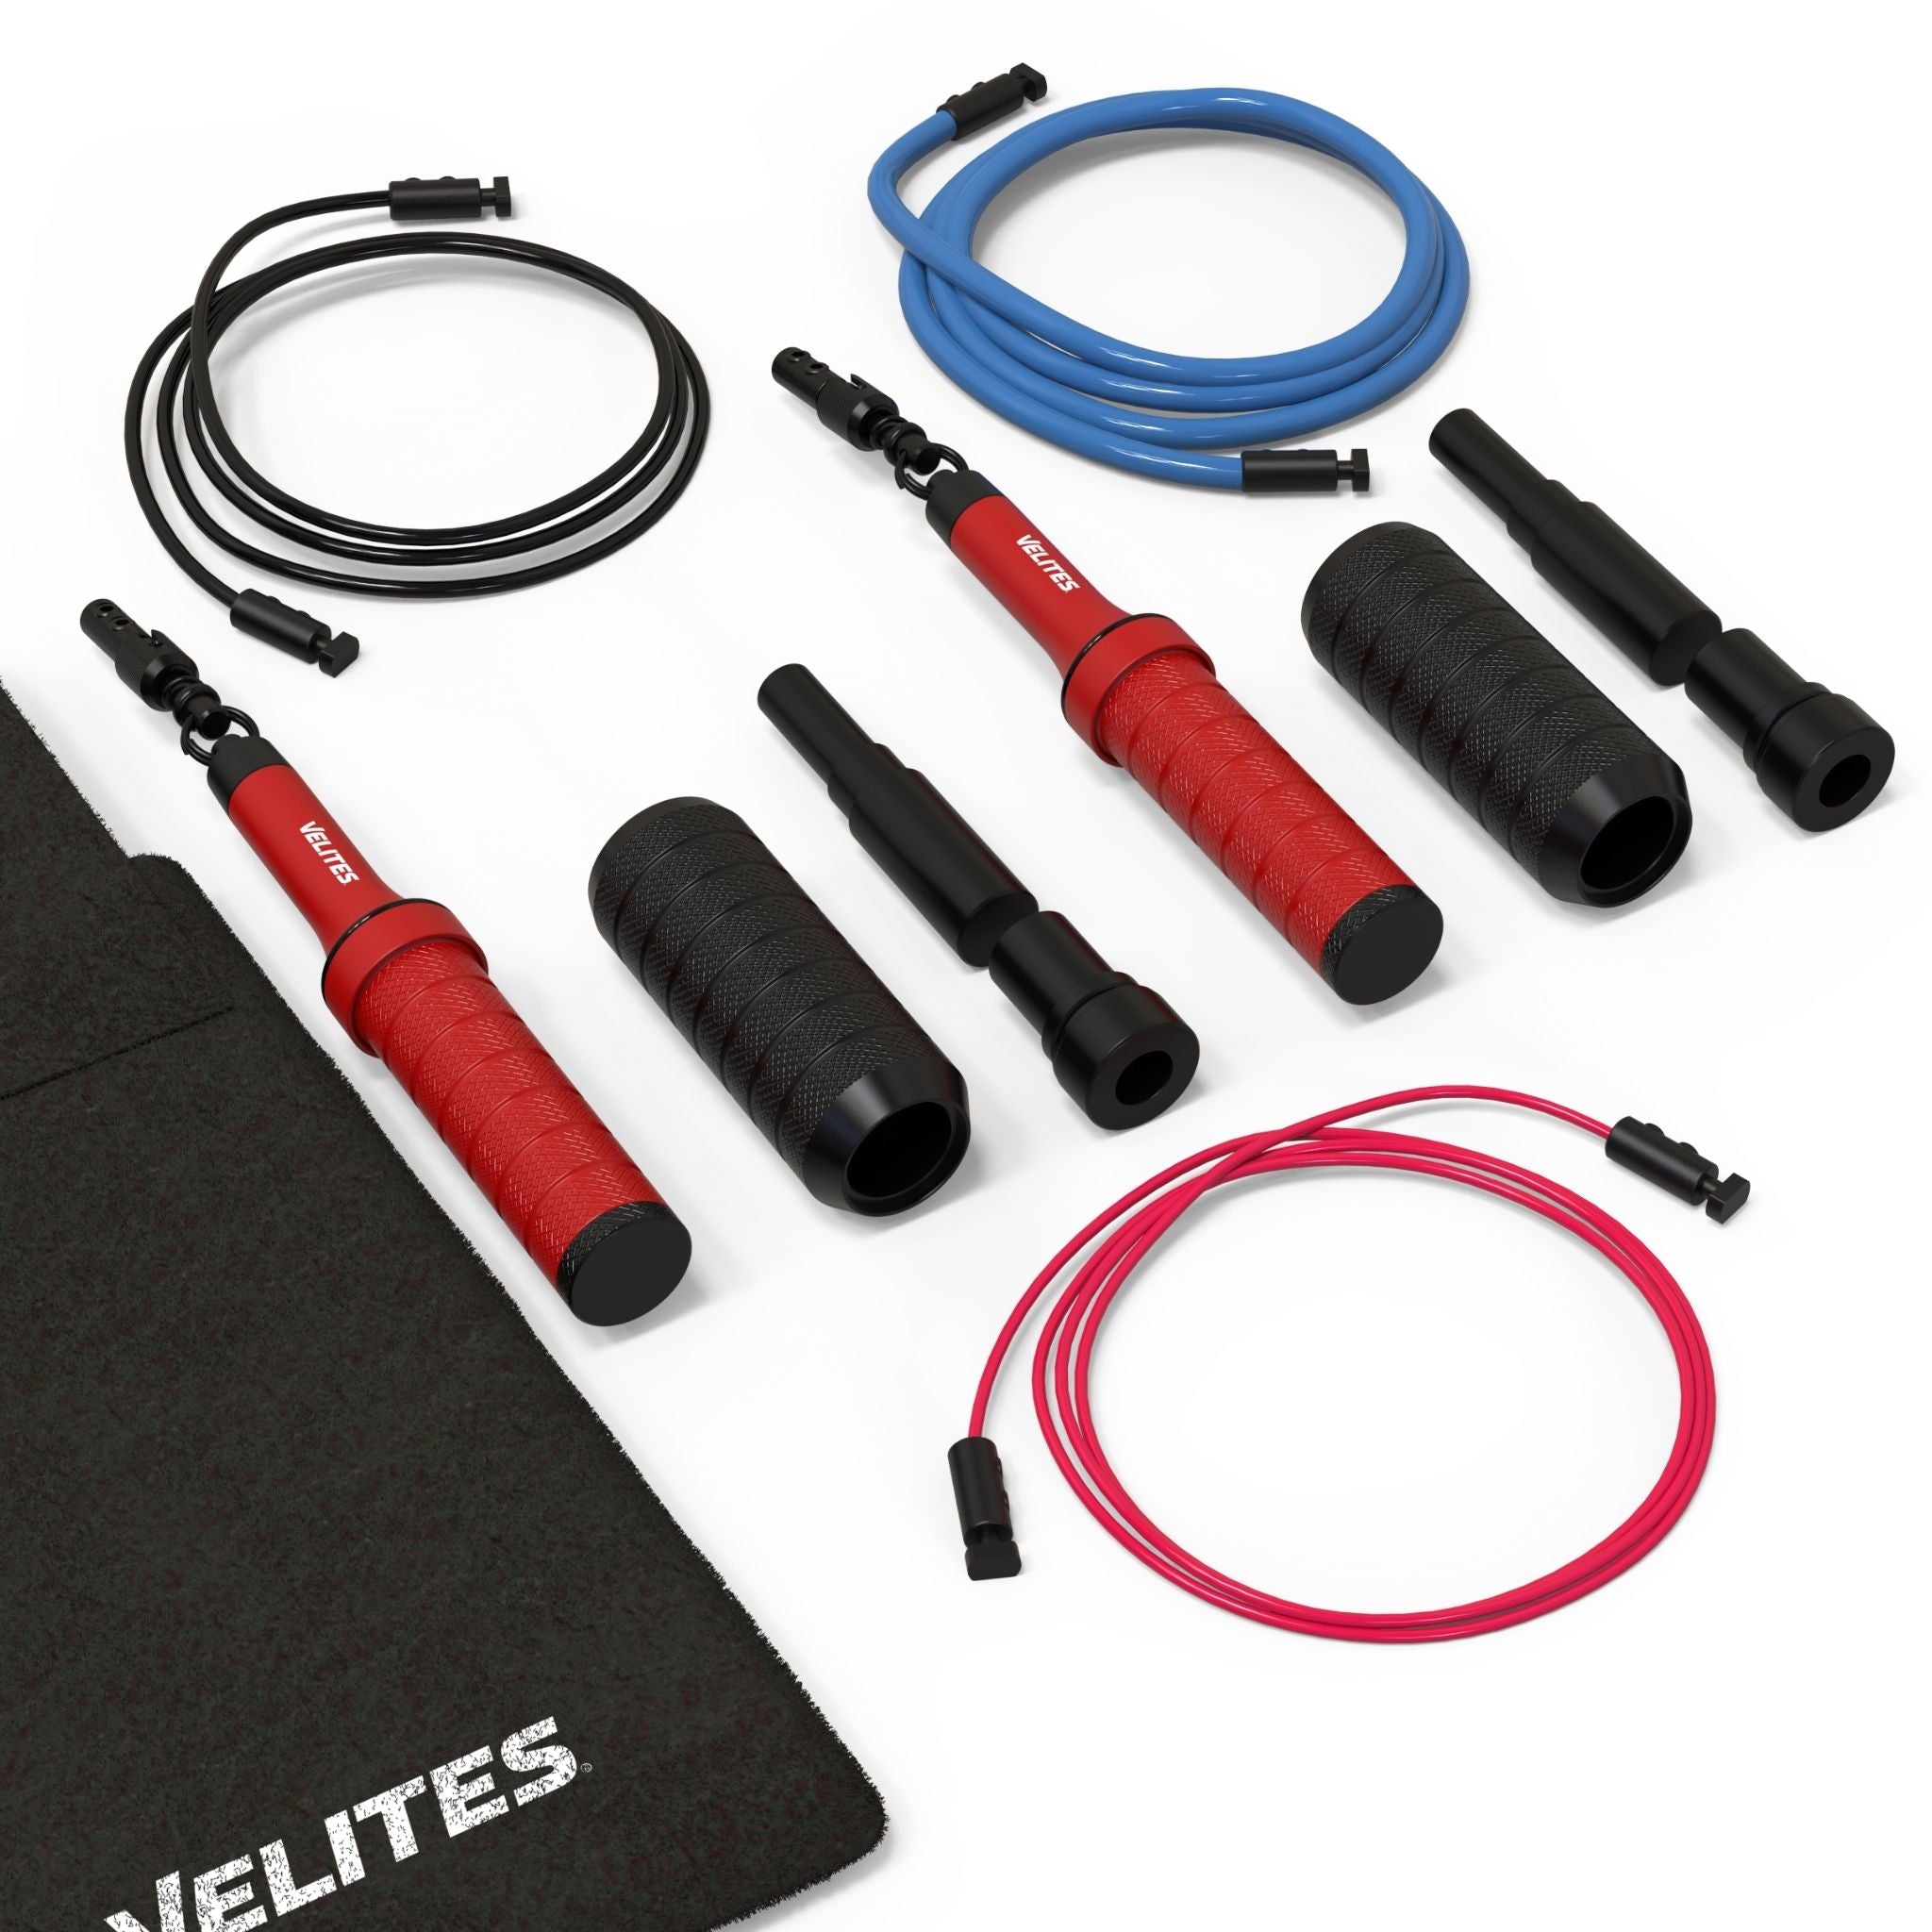 Pack Comba Earth 2.0 Velites + Lastres + Cables + Mat  MKP